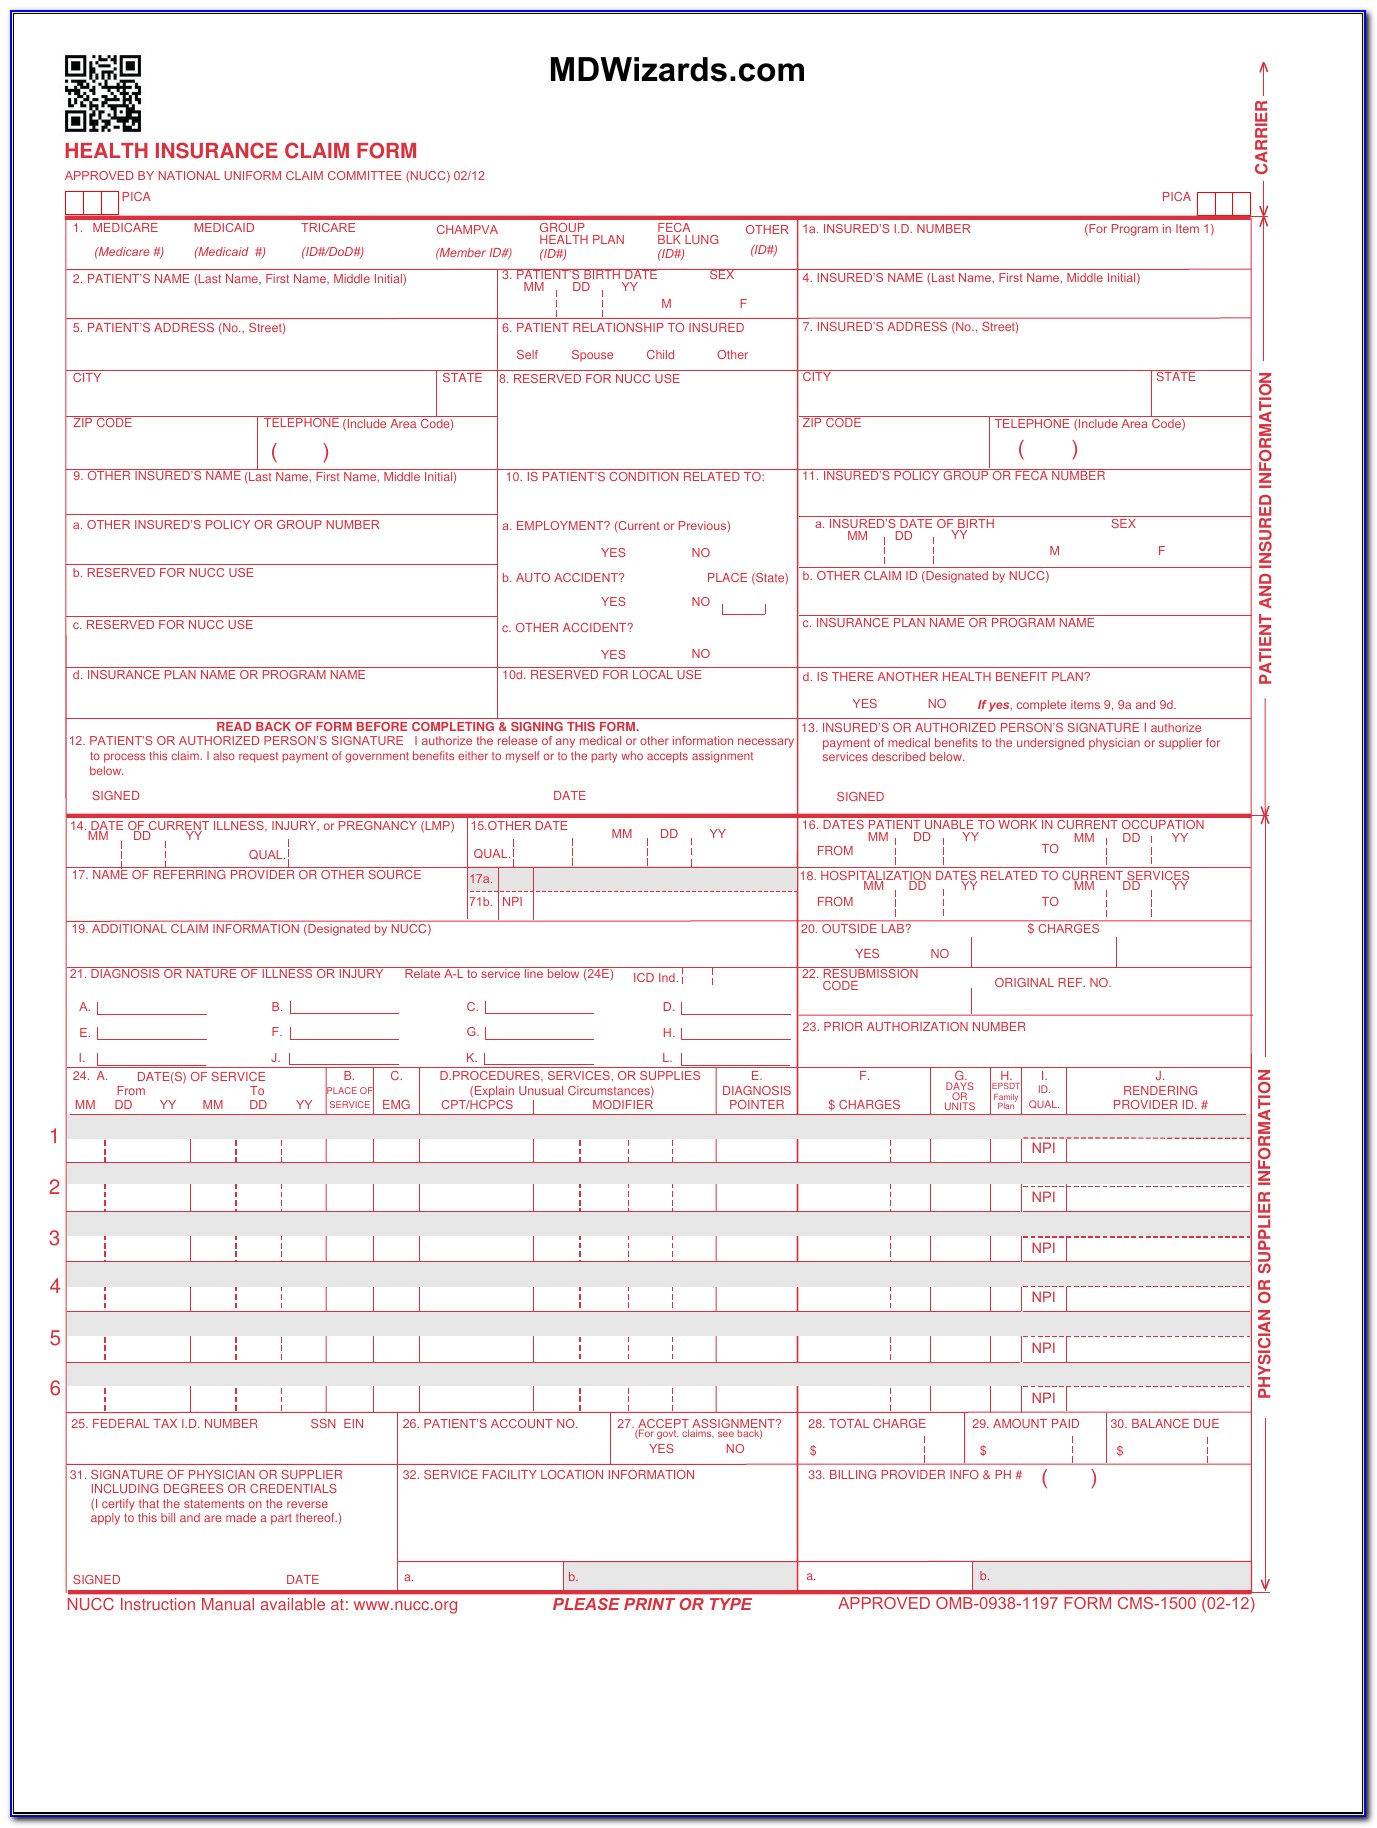 When To Use Cms 1500 Form